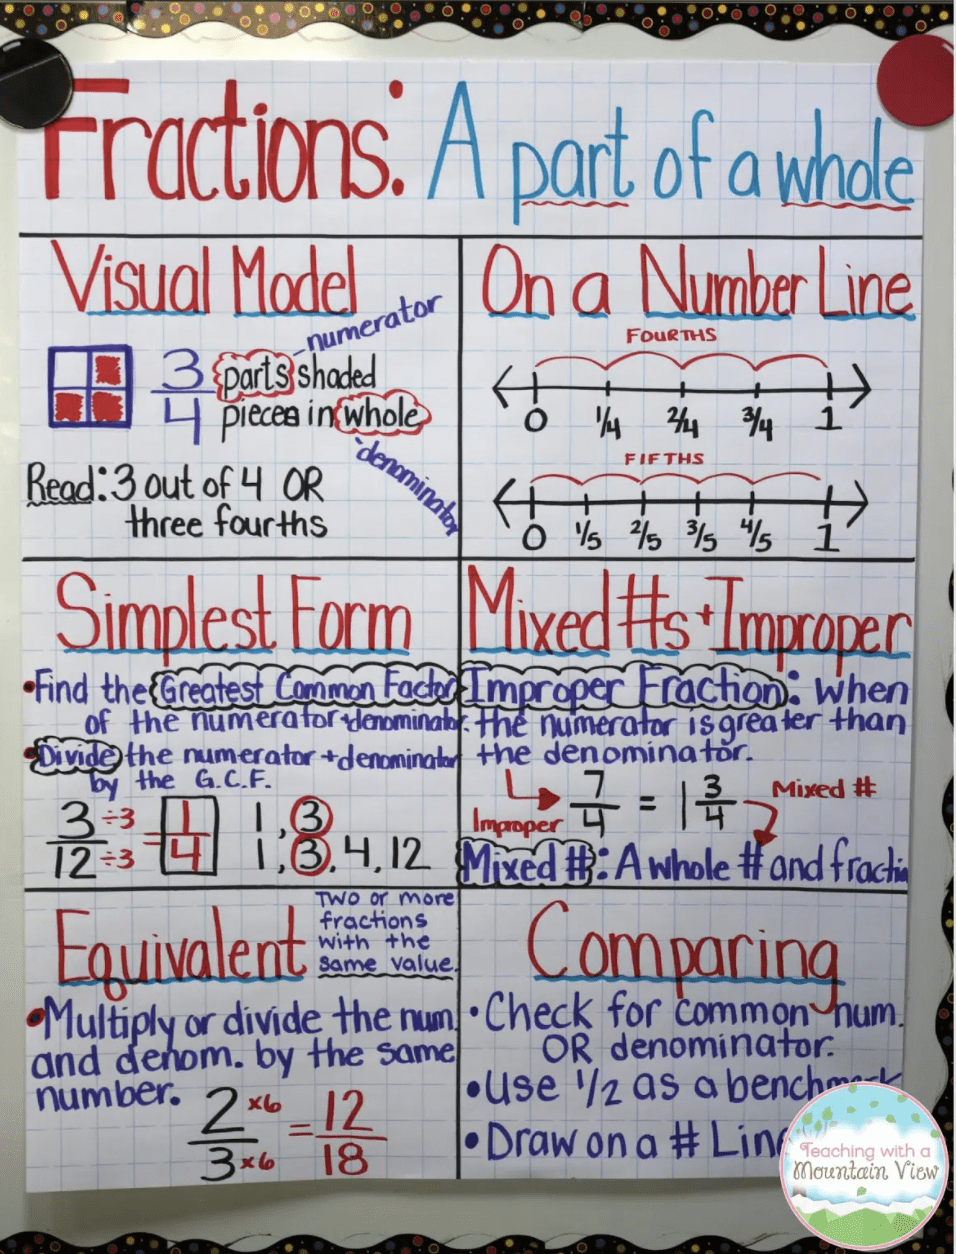 Fraction Anchor Chart represent parts of a whole in different ways.